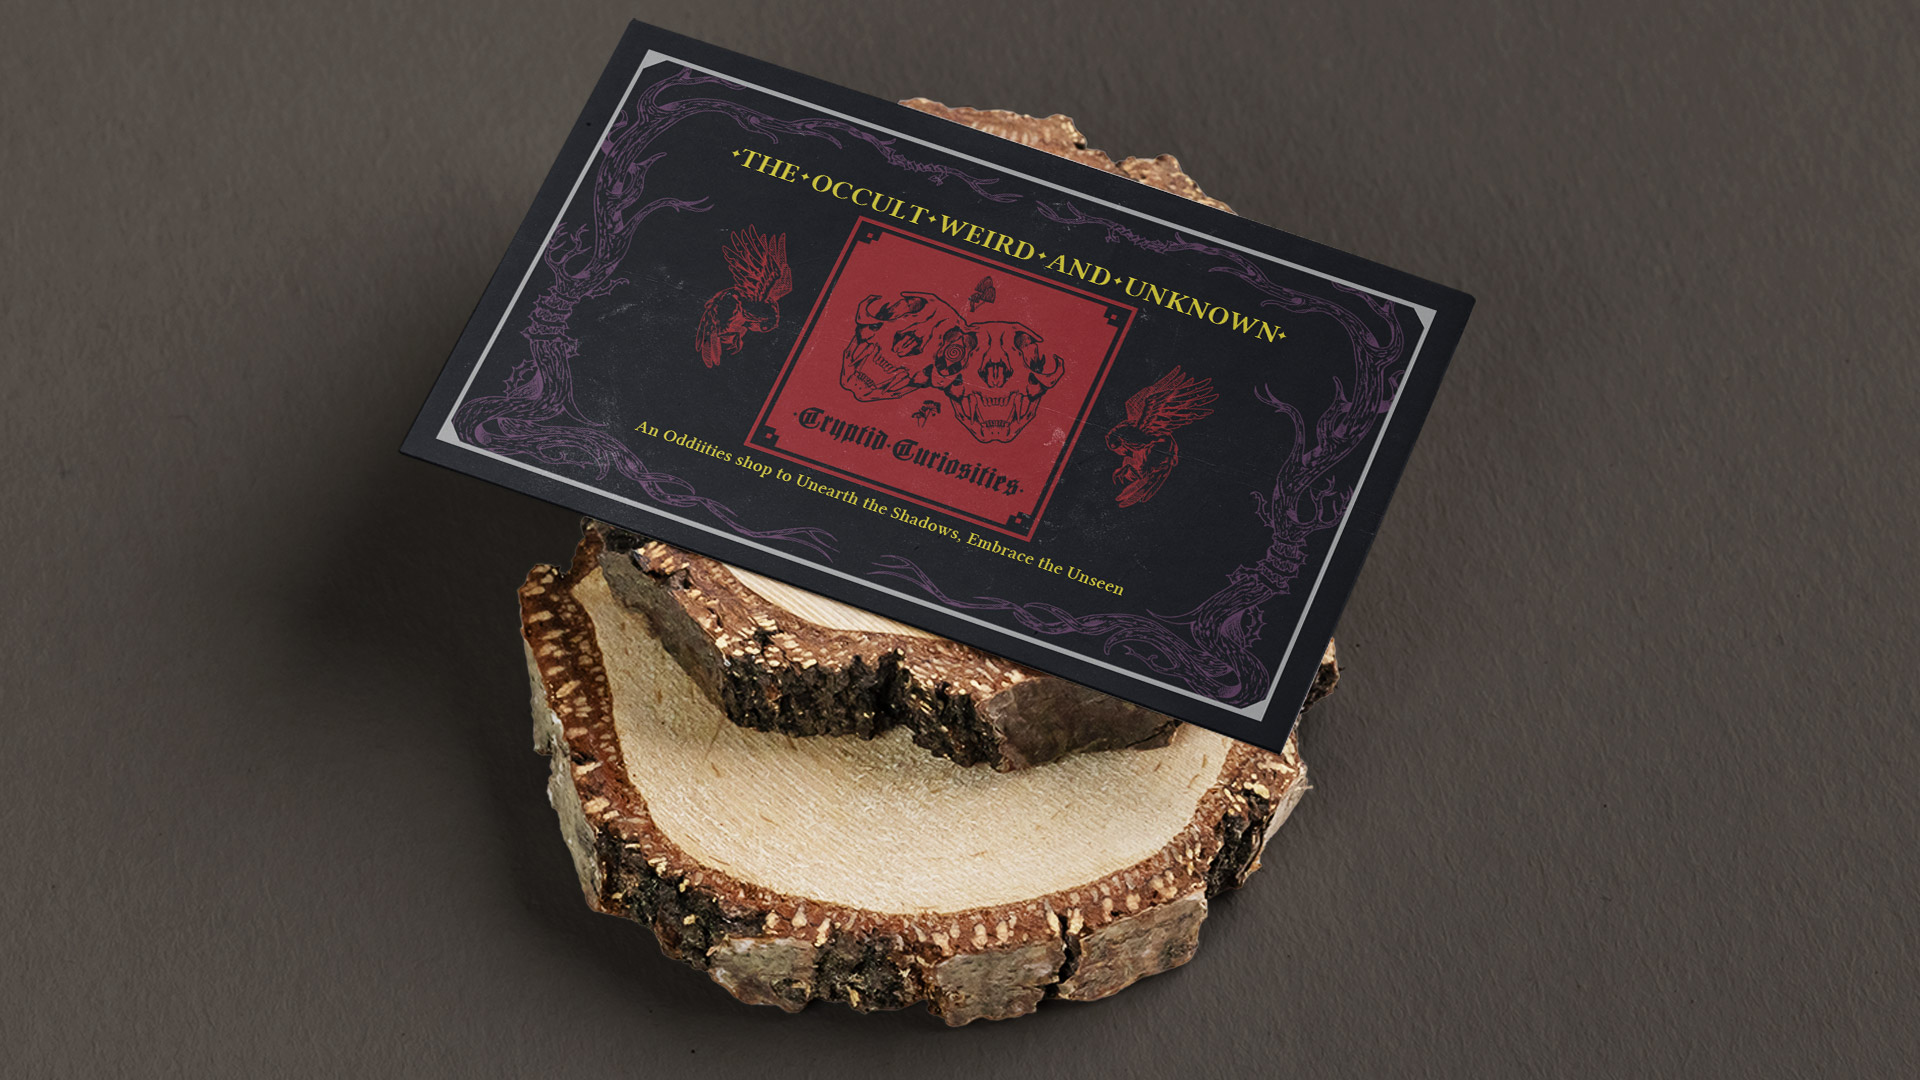 Cryptid Curiosity Business card / Cryptid Curiosity Business card: 3.5 x 2 inches, Business card design, 2023. Business card design for Cryptic Curiosities and Oddities Company that focuses on the creepy and macabre. Brand inspiration came from a love for the occult and horror.